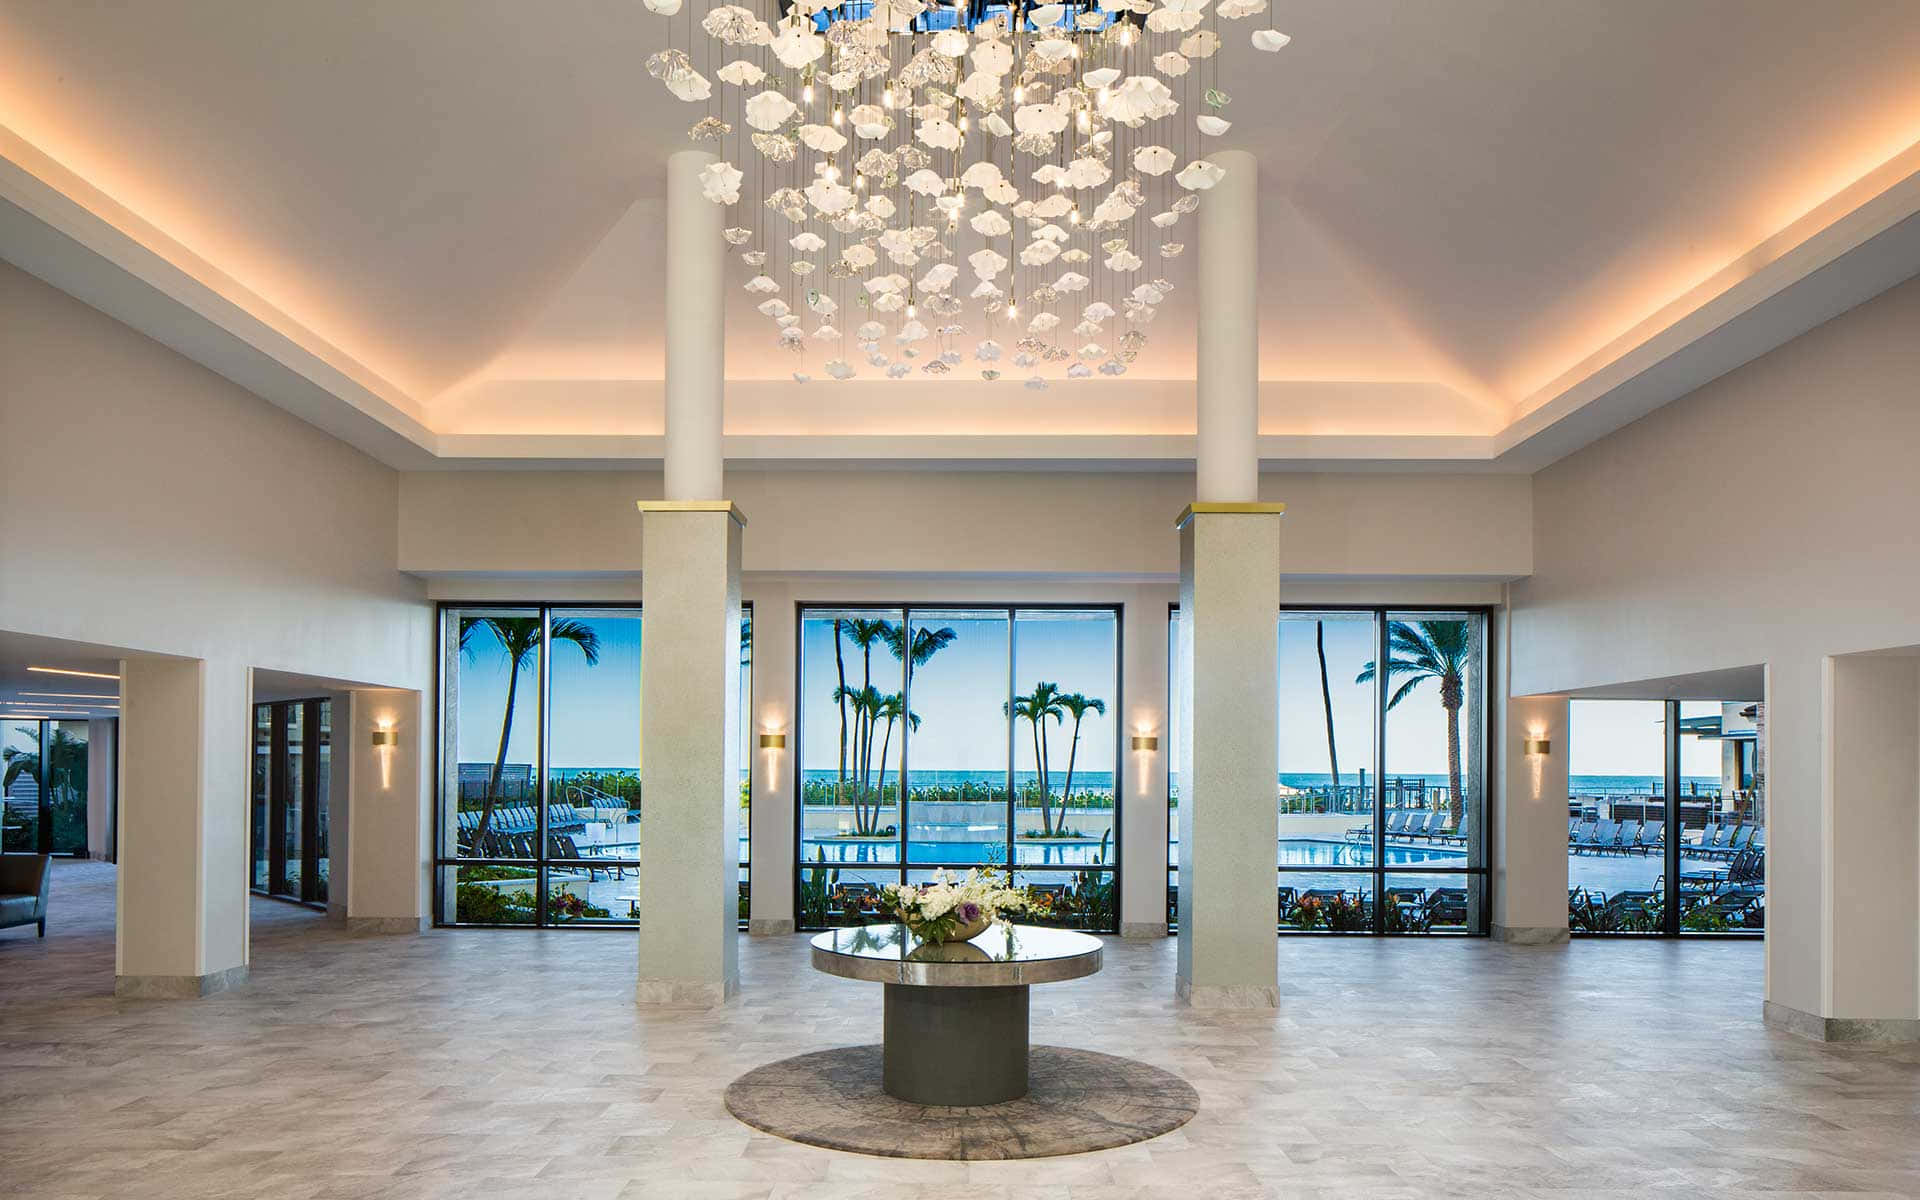 A Lobby With A Chandelier And Large Windows